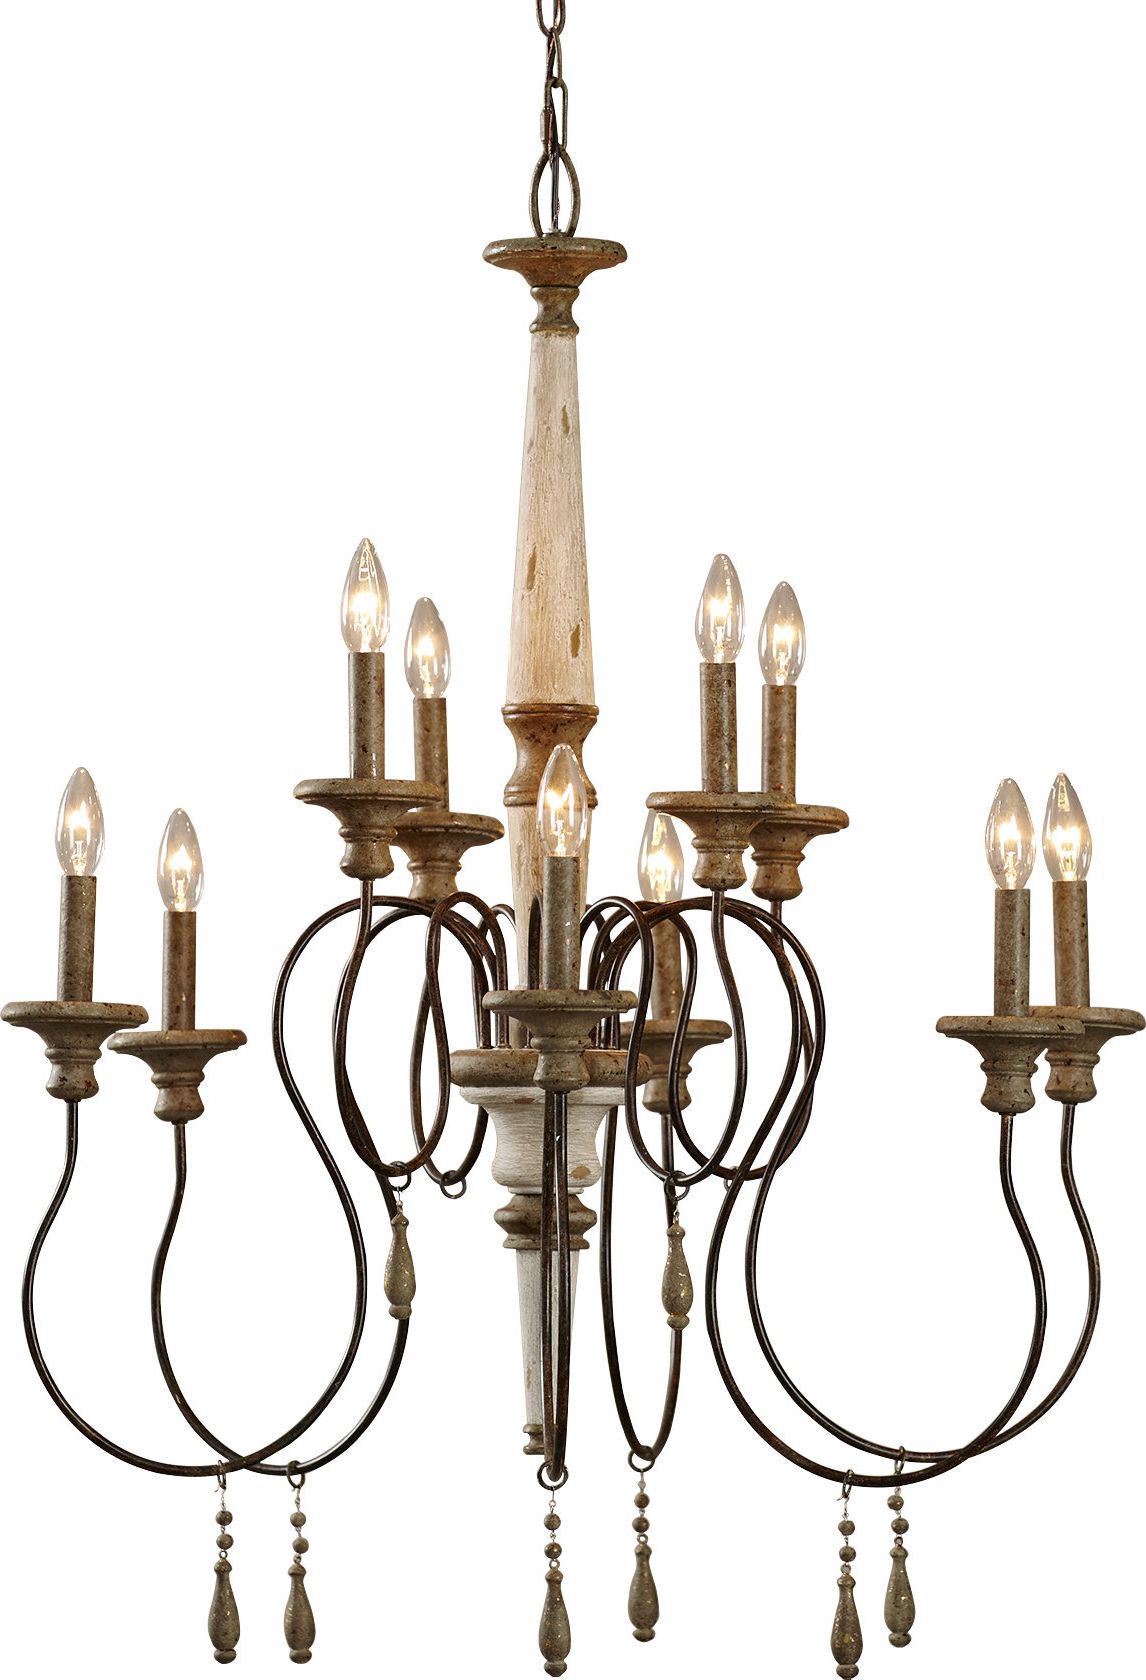 Armande Candle Style Chandeliers Pertaining To Most Recent Lark Manor Armande Candle Style Chandelier (View 5 of 25)